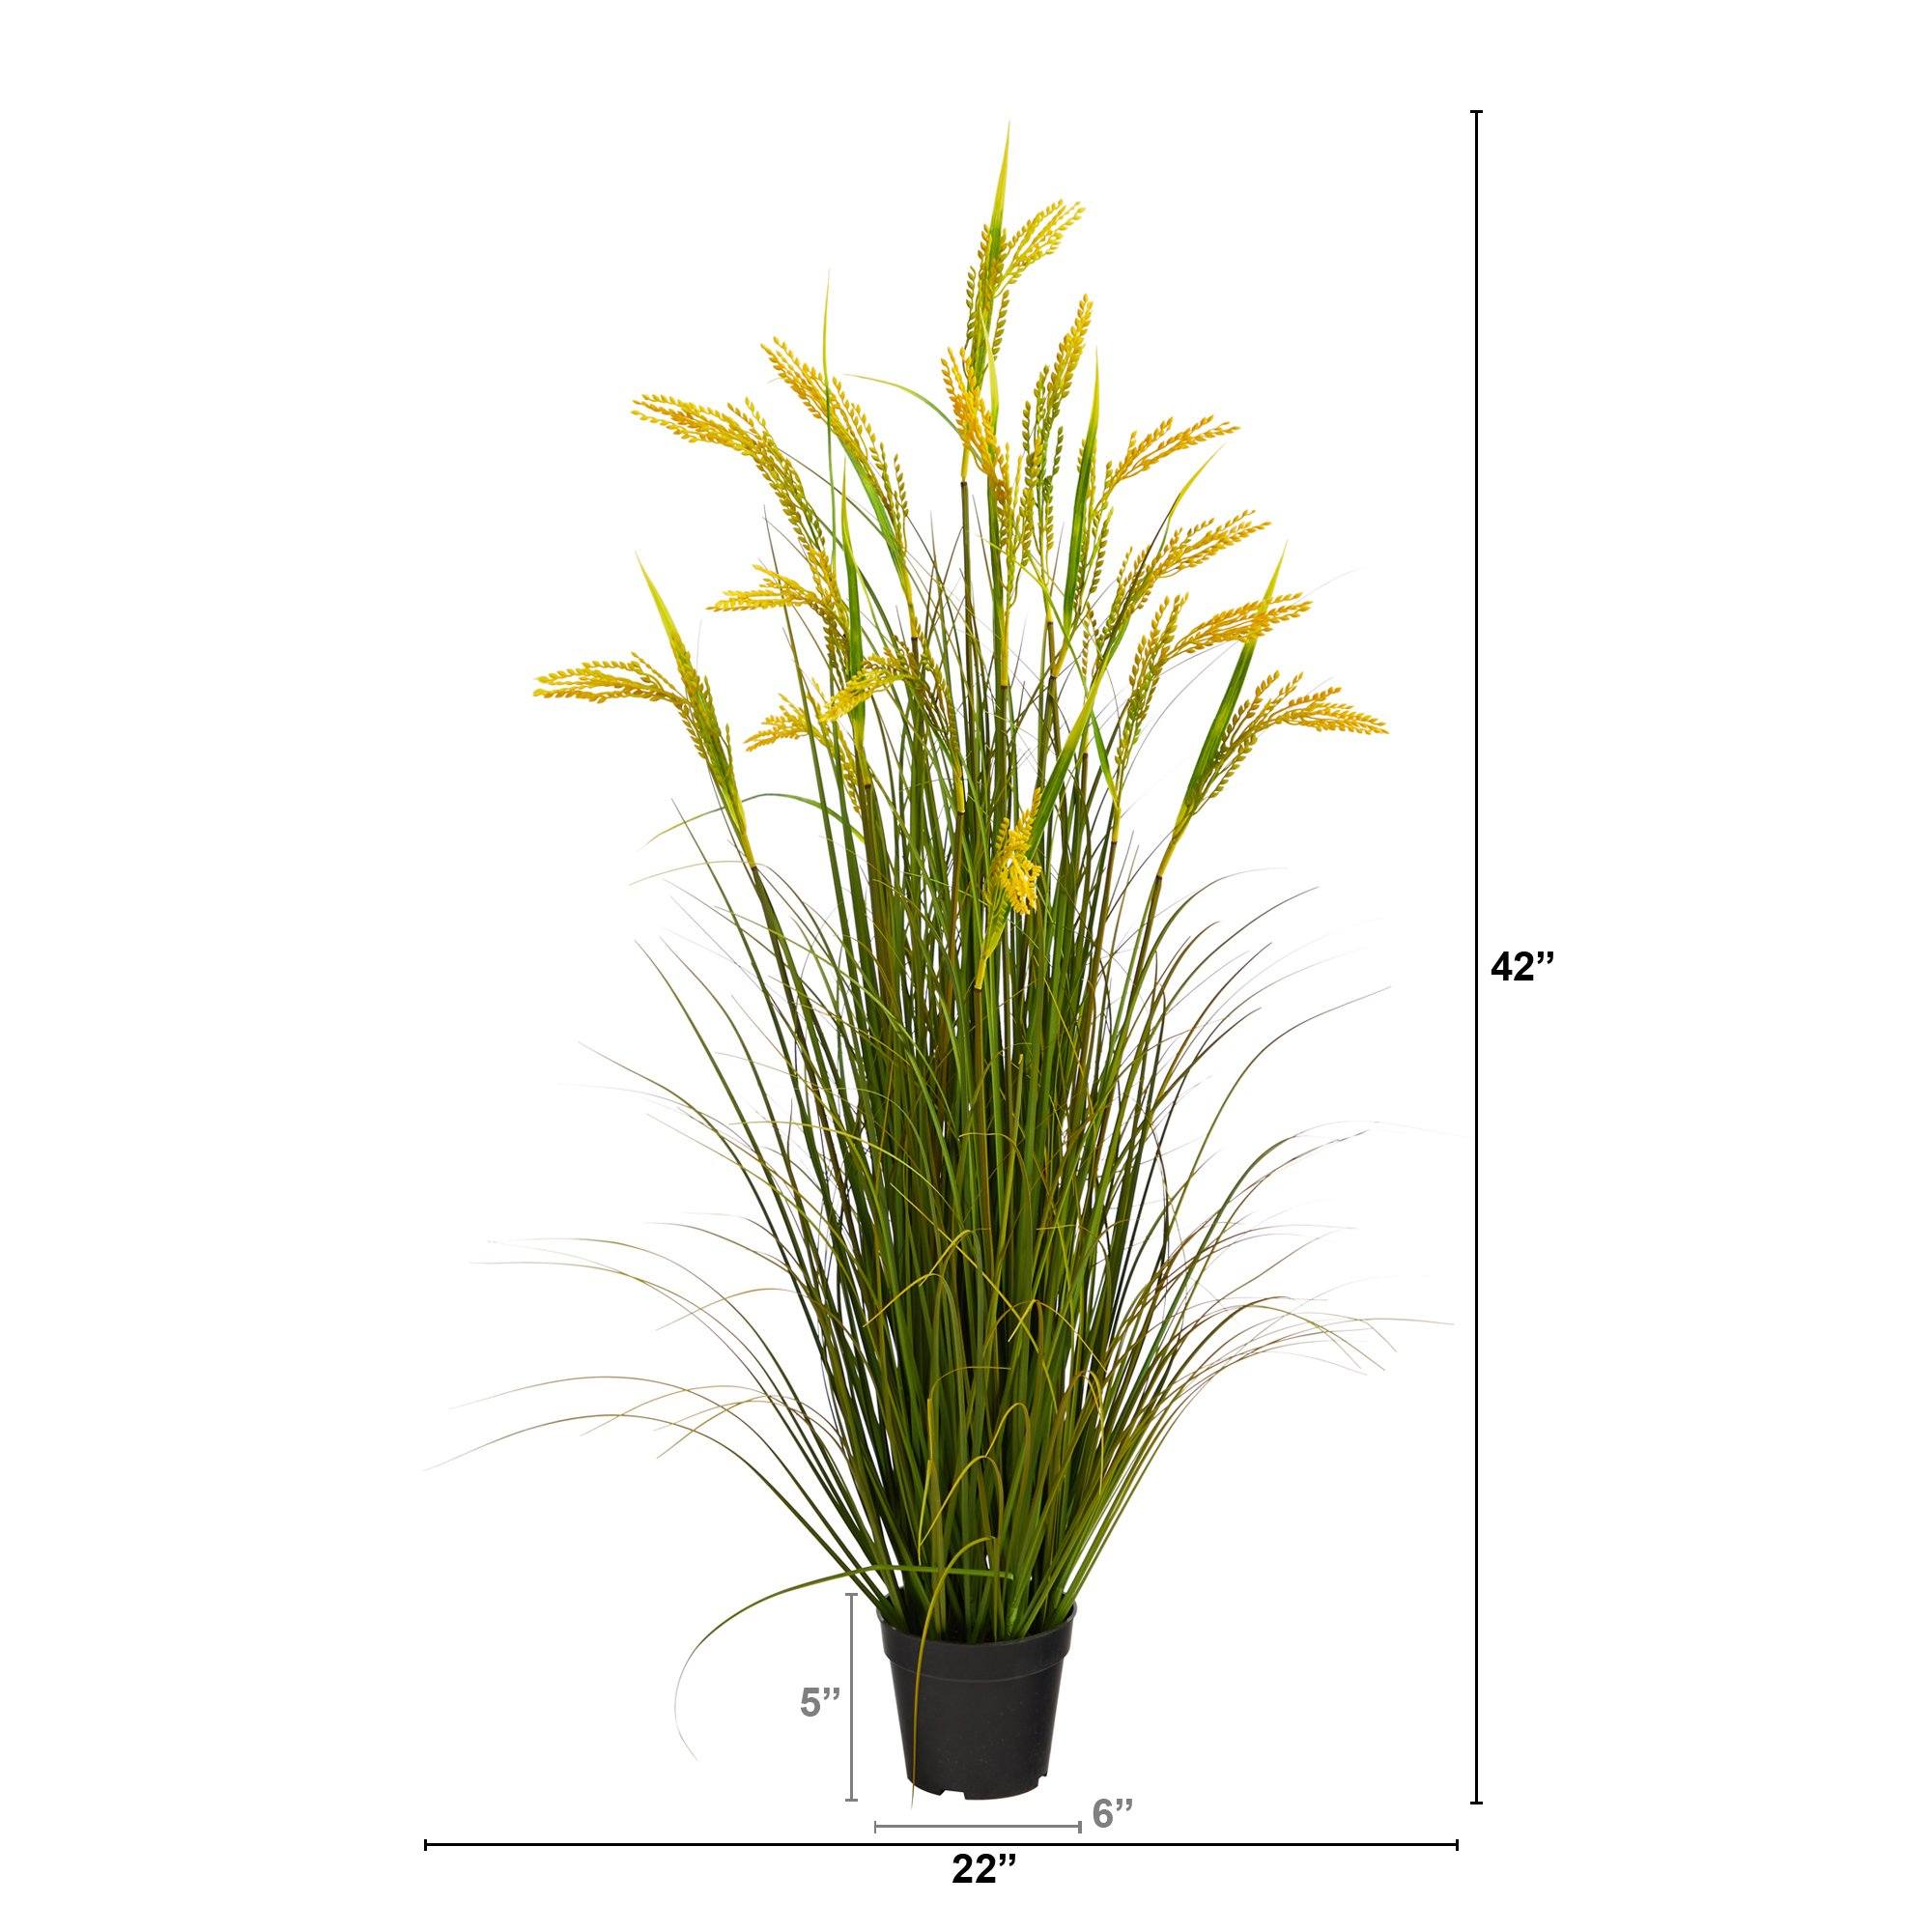 Artificial Plant - 3.5’ Wheat Grain Plant by Nearly Natural